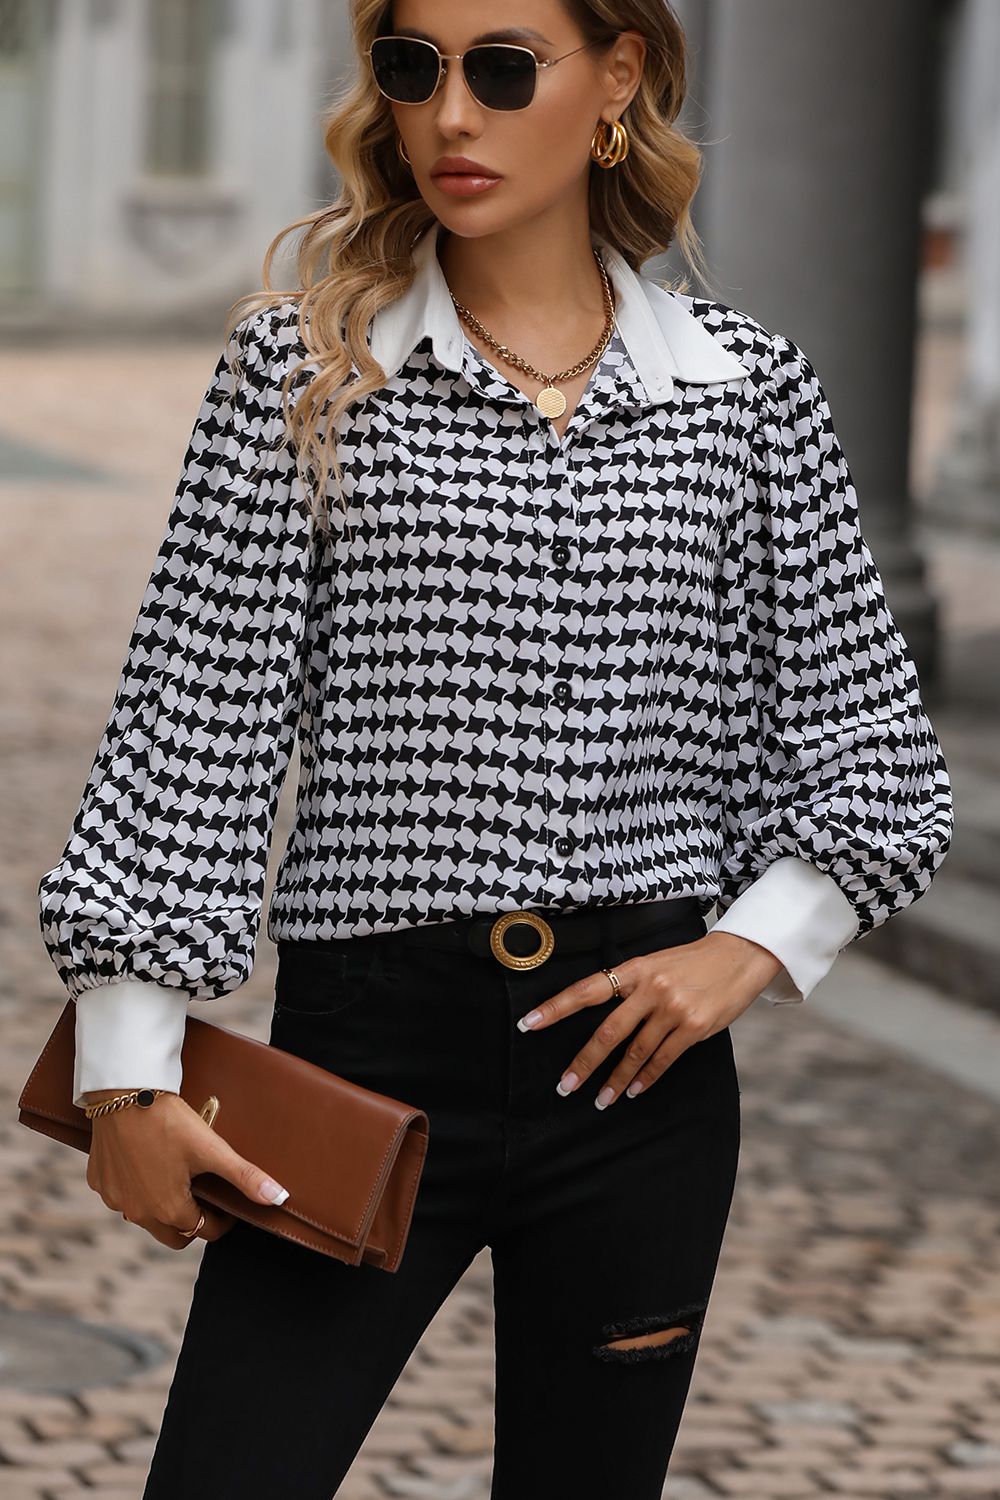 Houndstooth Print Lapel Neck Shirt | On sale | 95% polyester